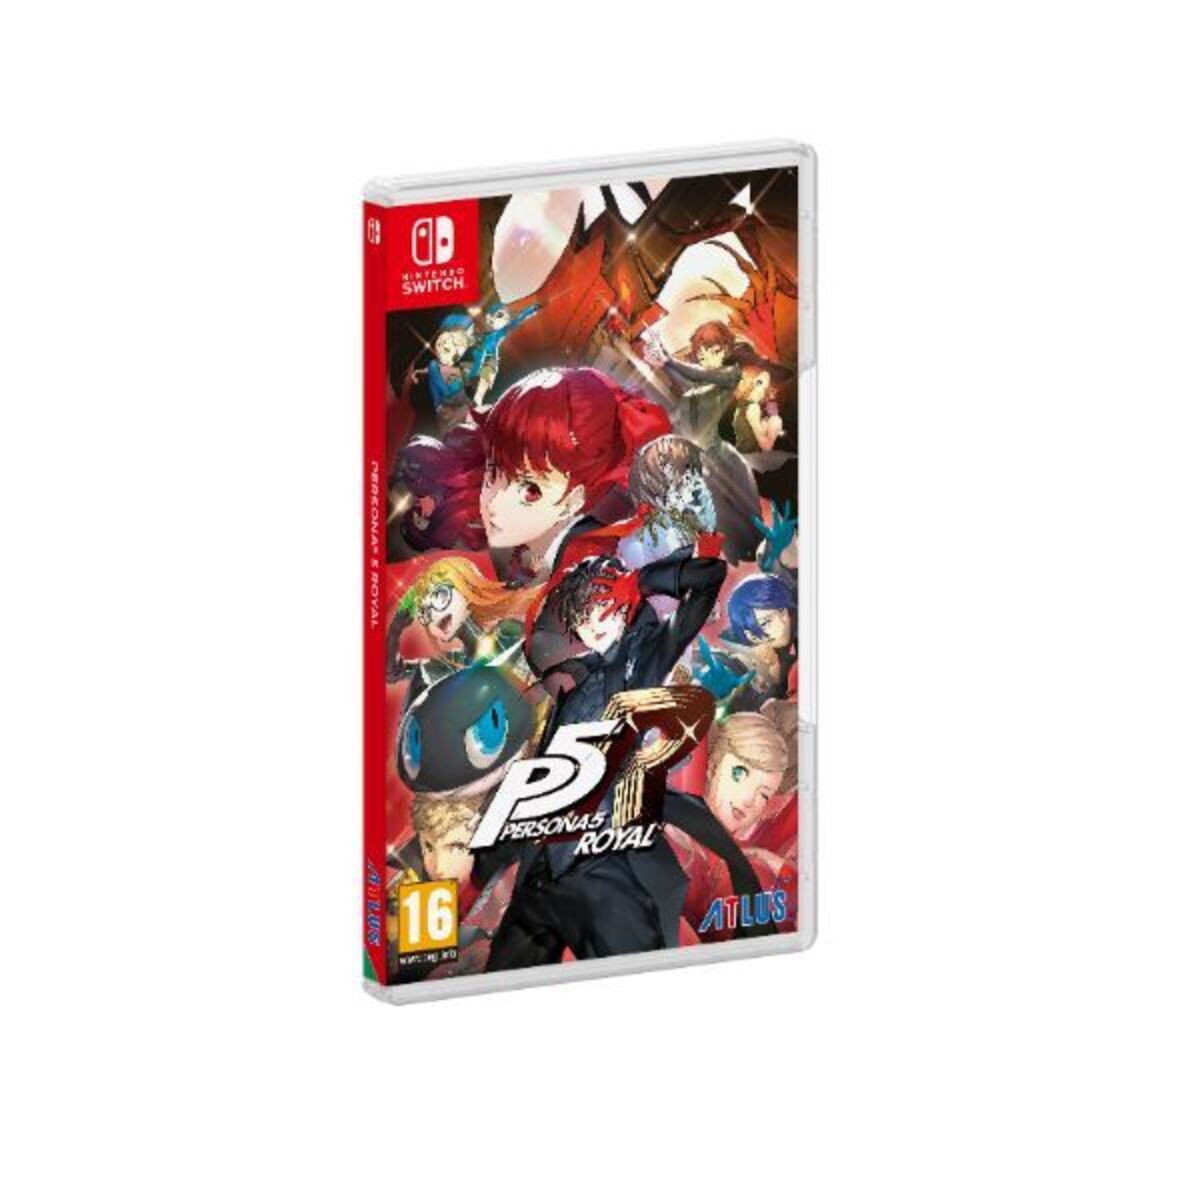 Buy Persona 5 Royal Switch -